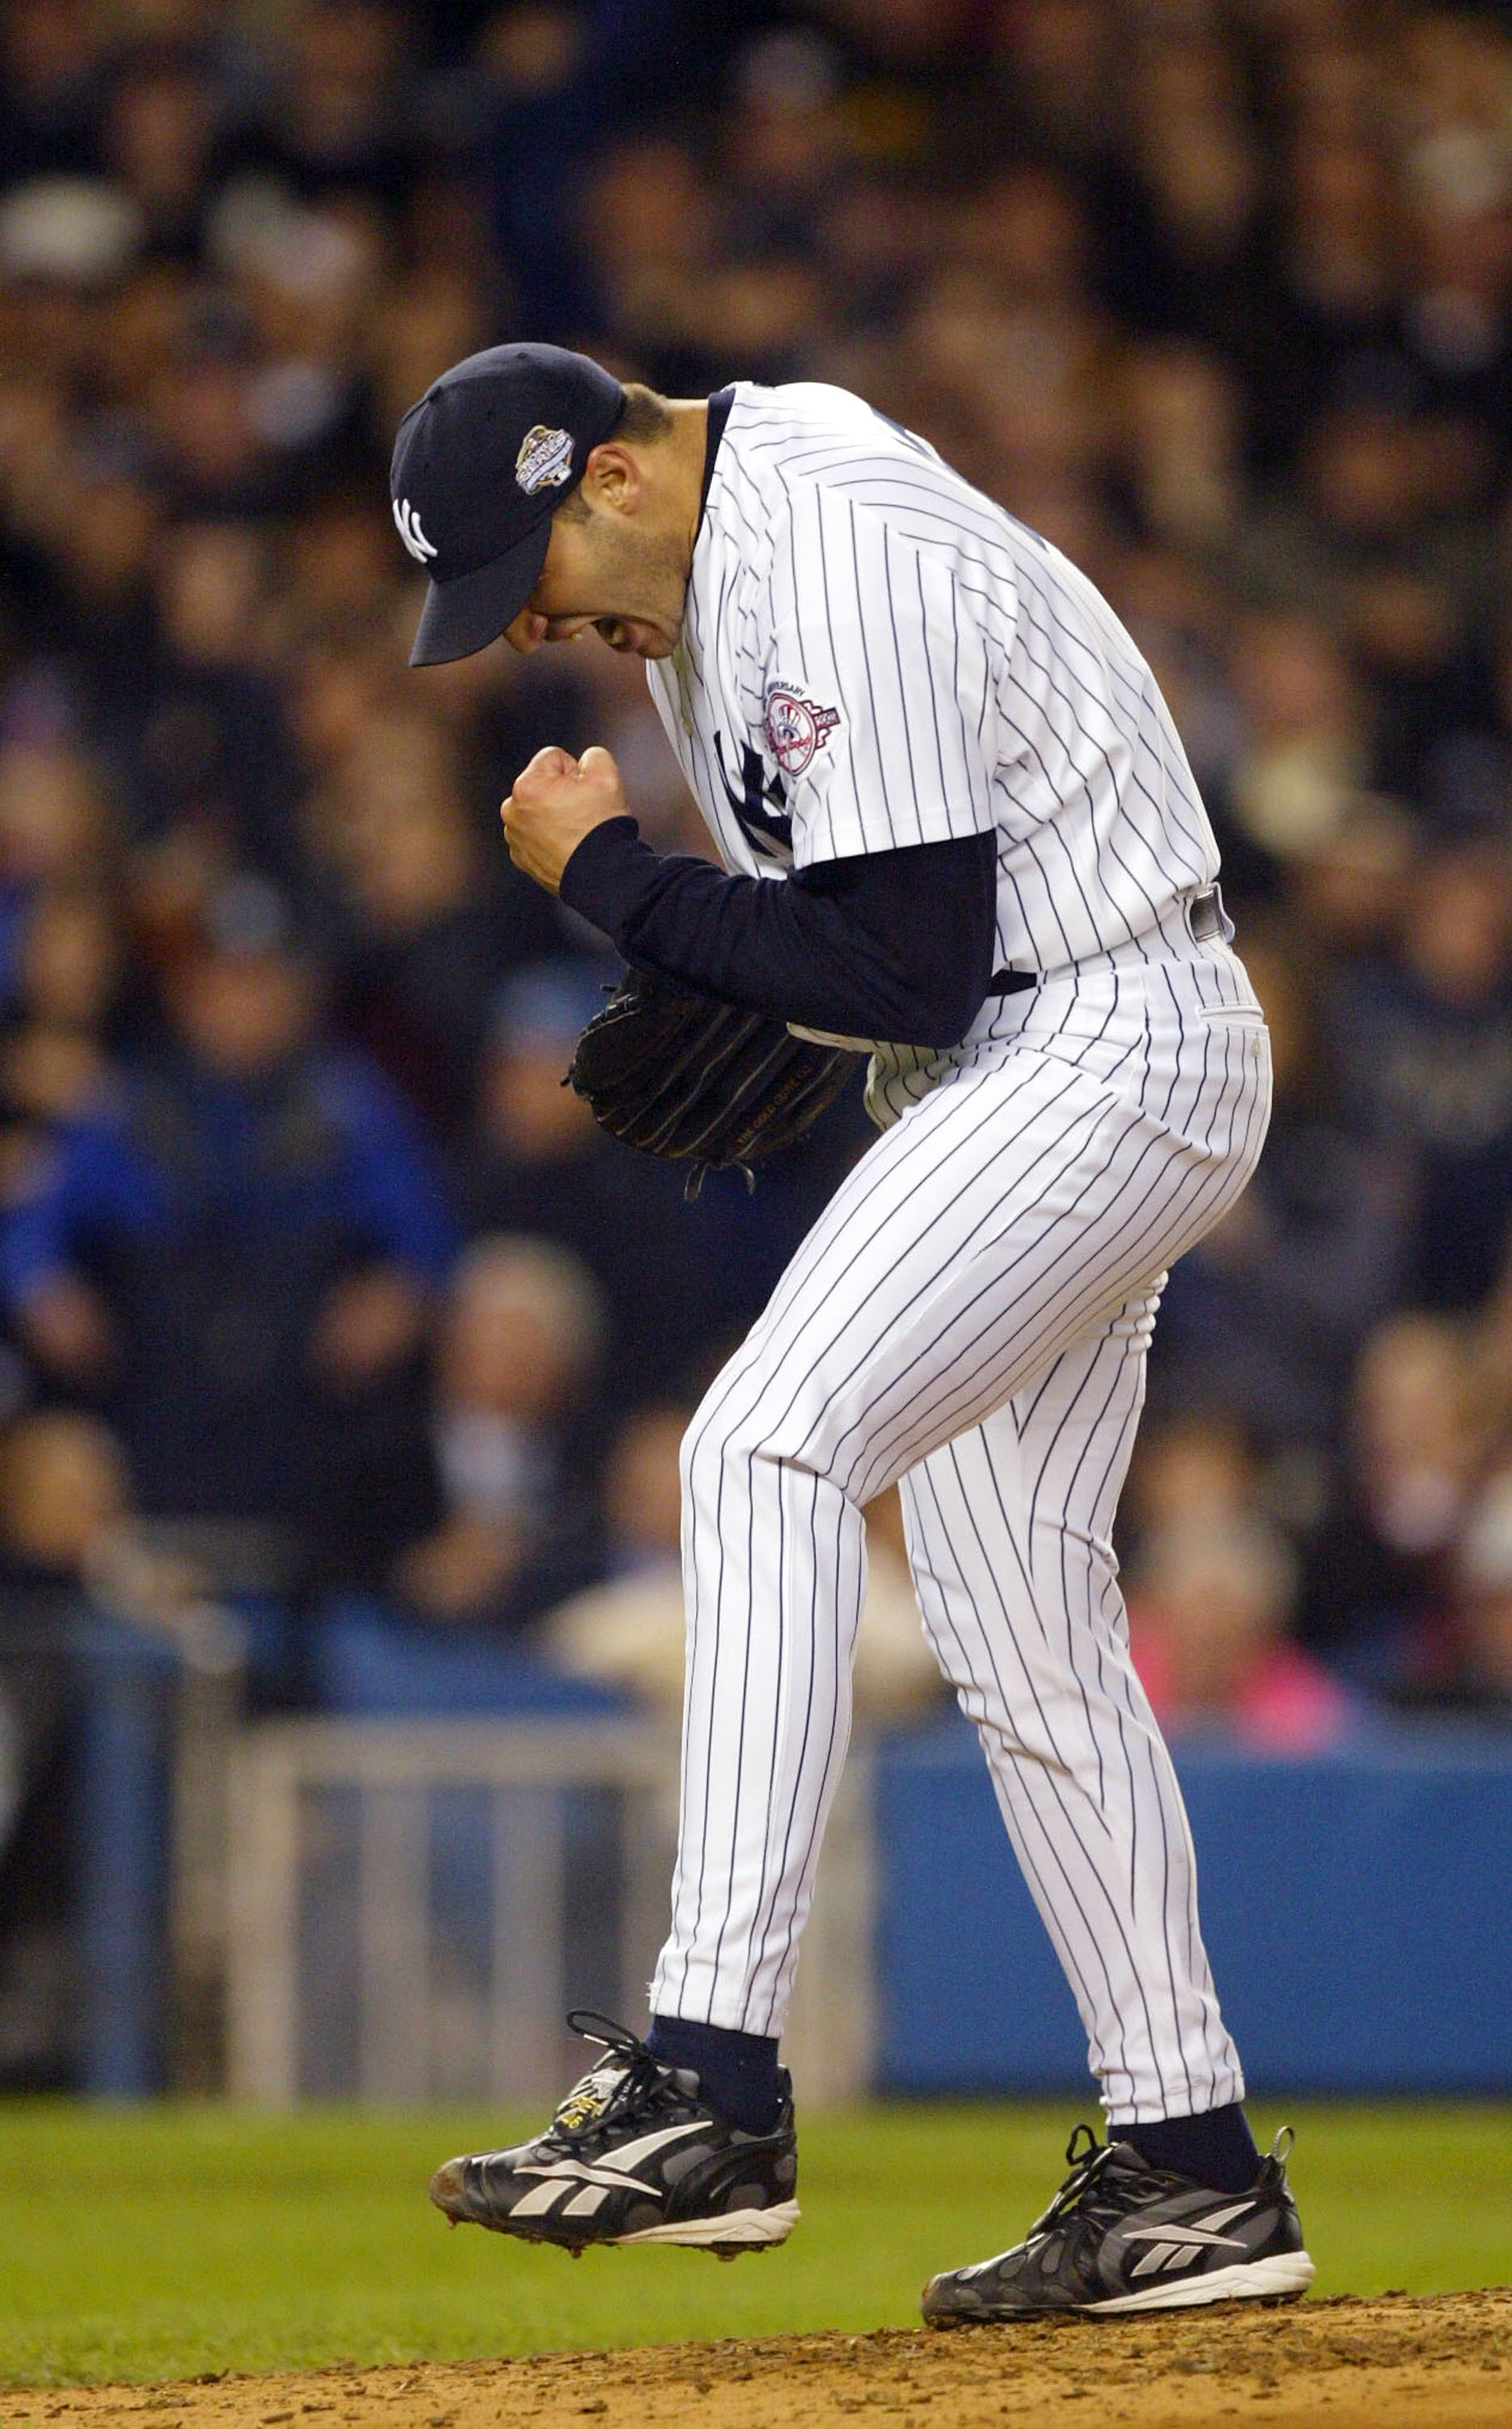 Andy Pettitte of New York Yankees caps career with complete-game